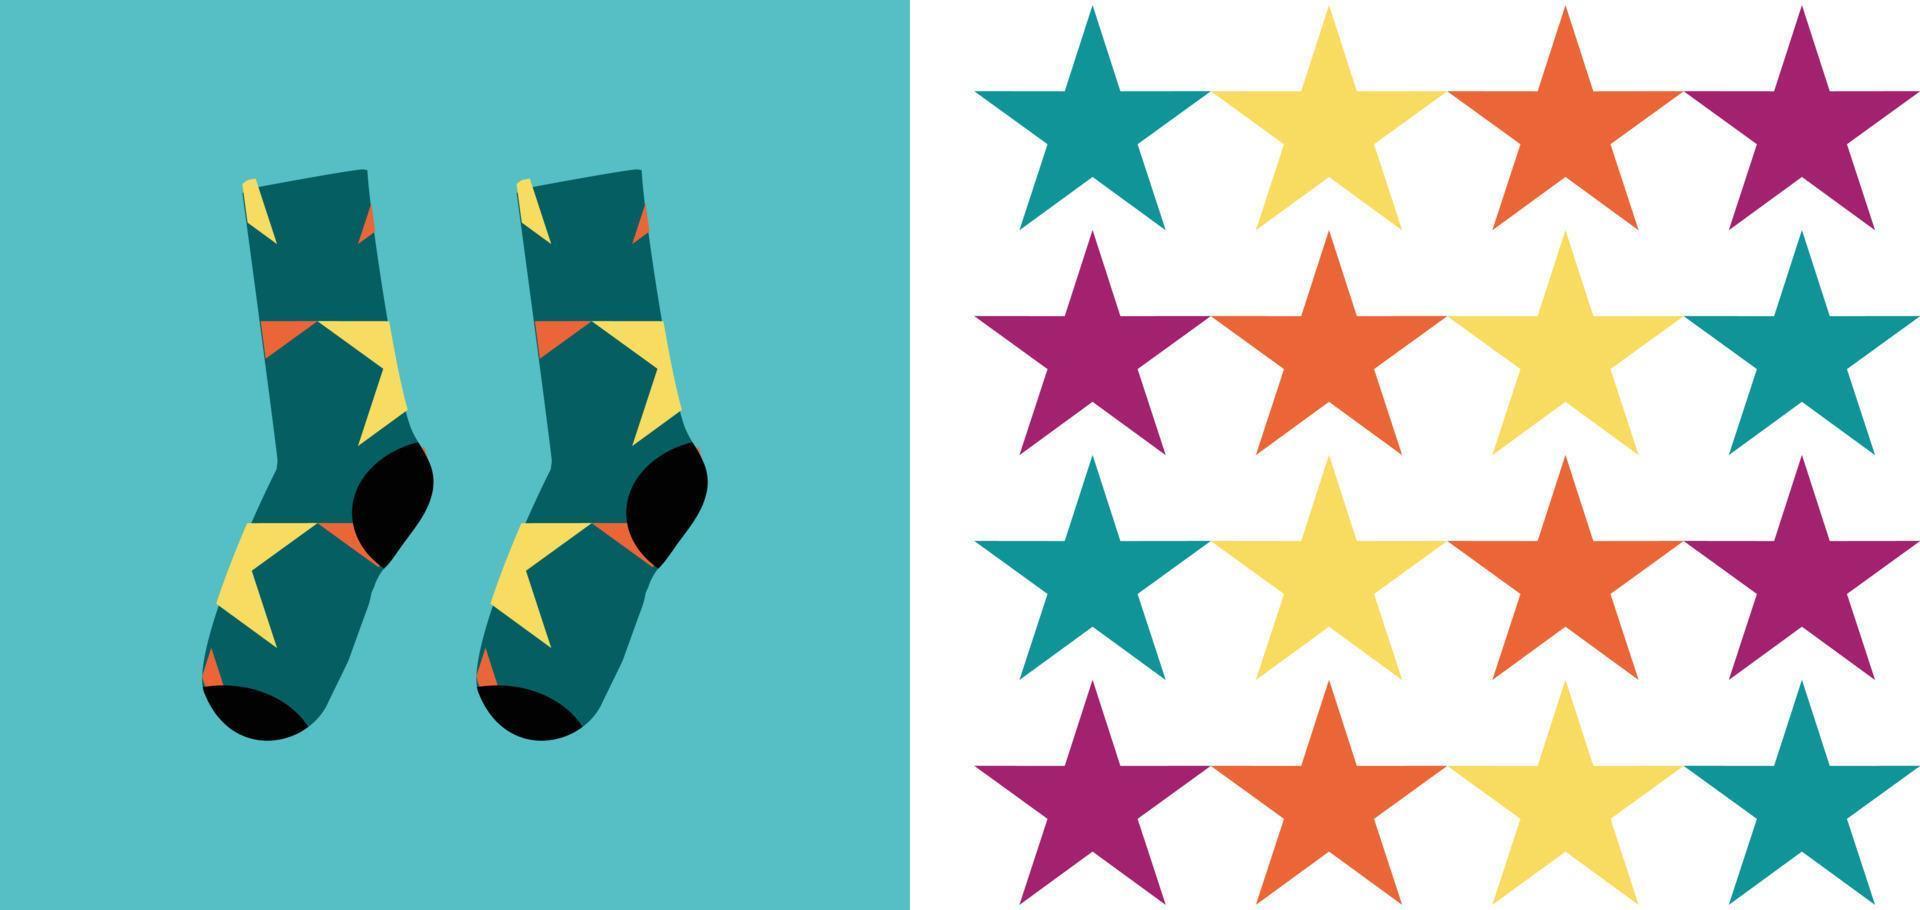 vector illustration of star pattern with socks mockup and others